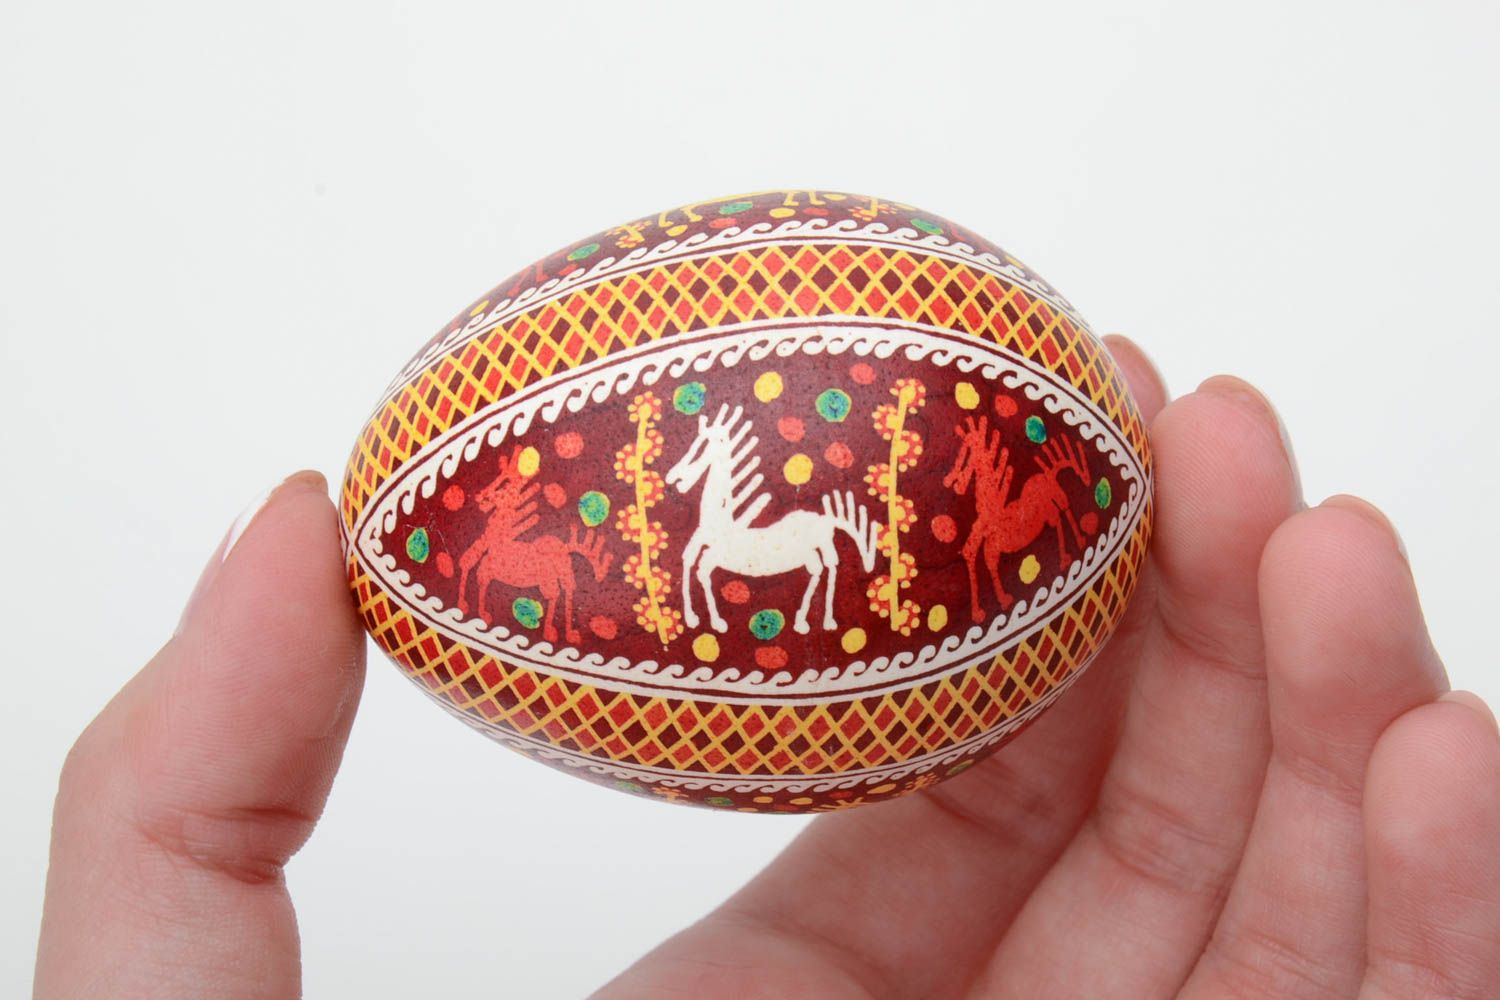 Homemade designer painted Easter egg with horse pattern created using waxing technique photo 5